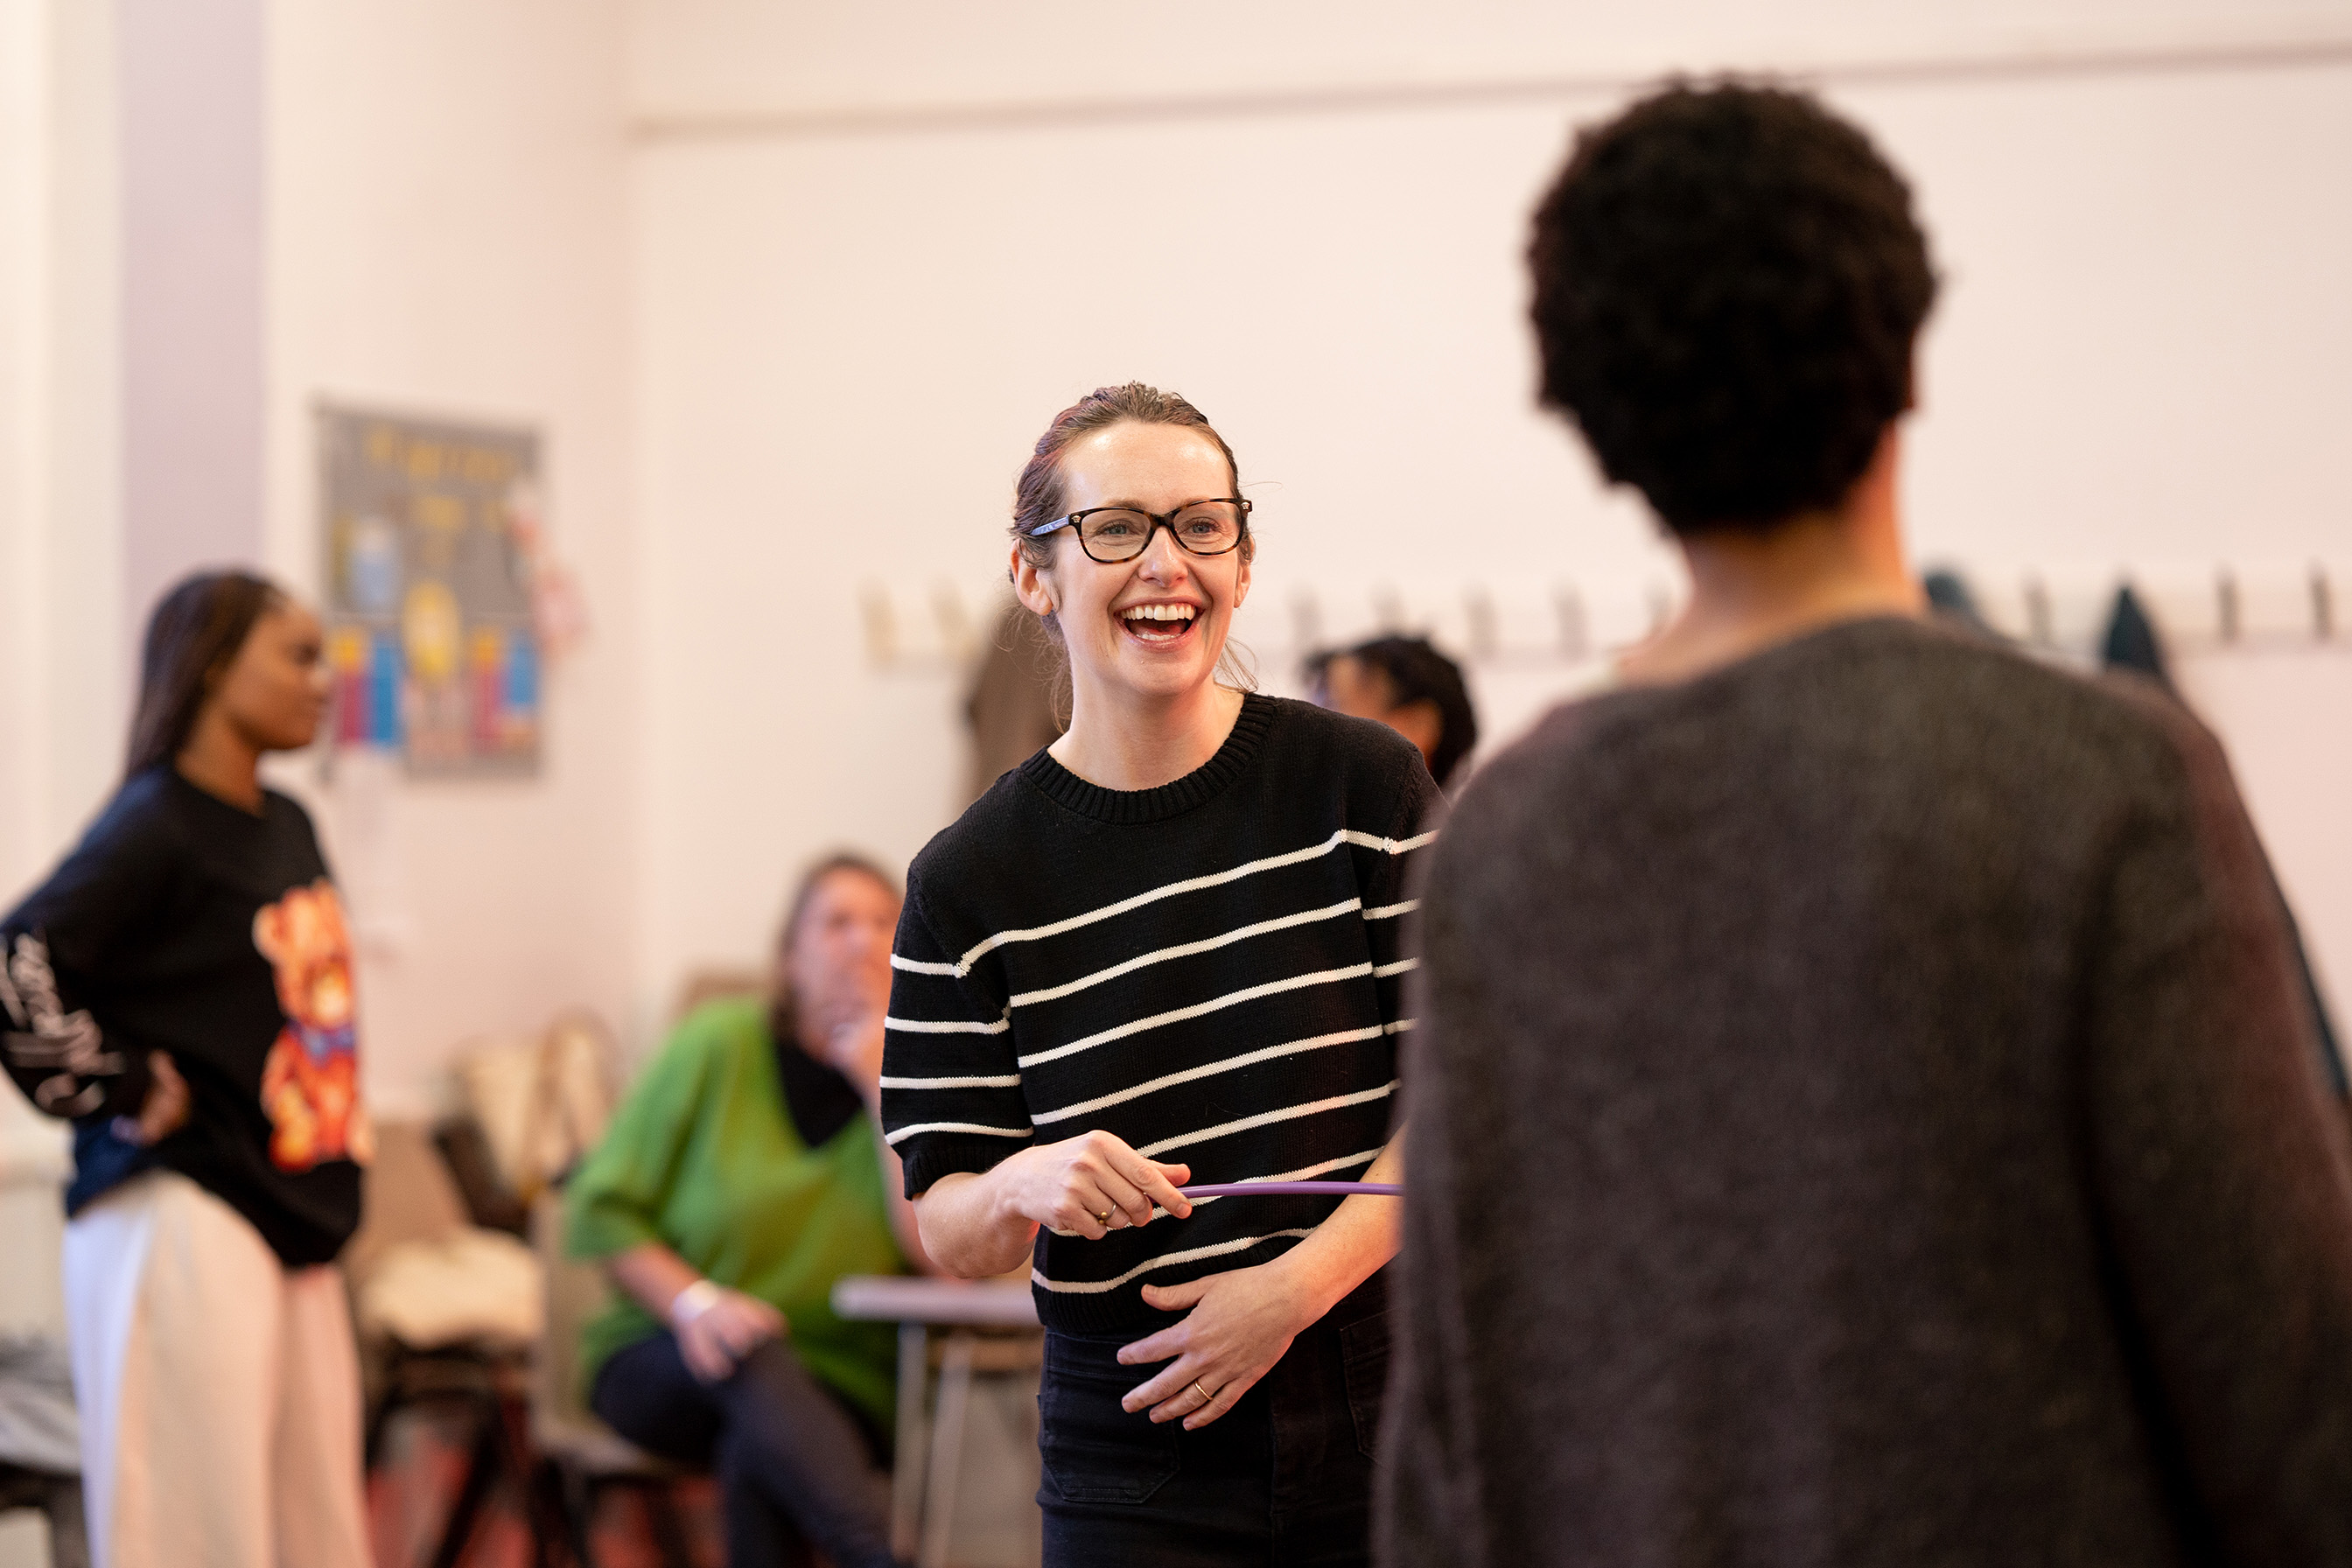 Image of Rhian Blythe in rehearsals. Rhian is a white woman in her forties. She has strawberry blonde hair tied back into a ponytail. She is wearing a black and white striped jumper. 